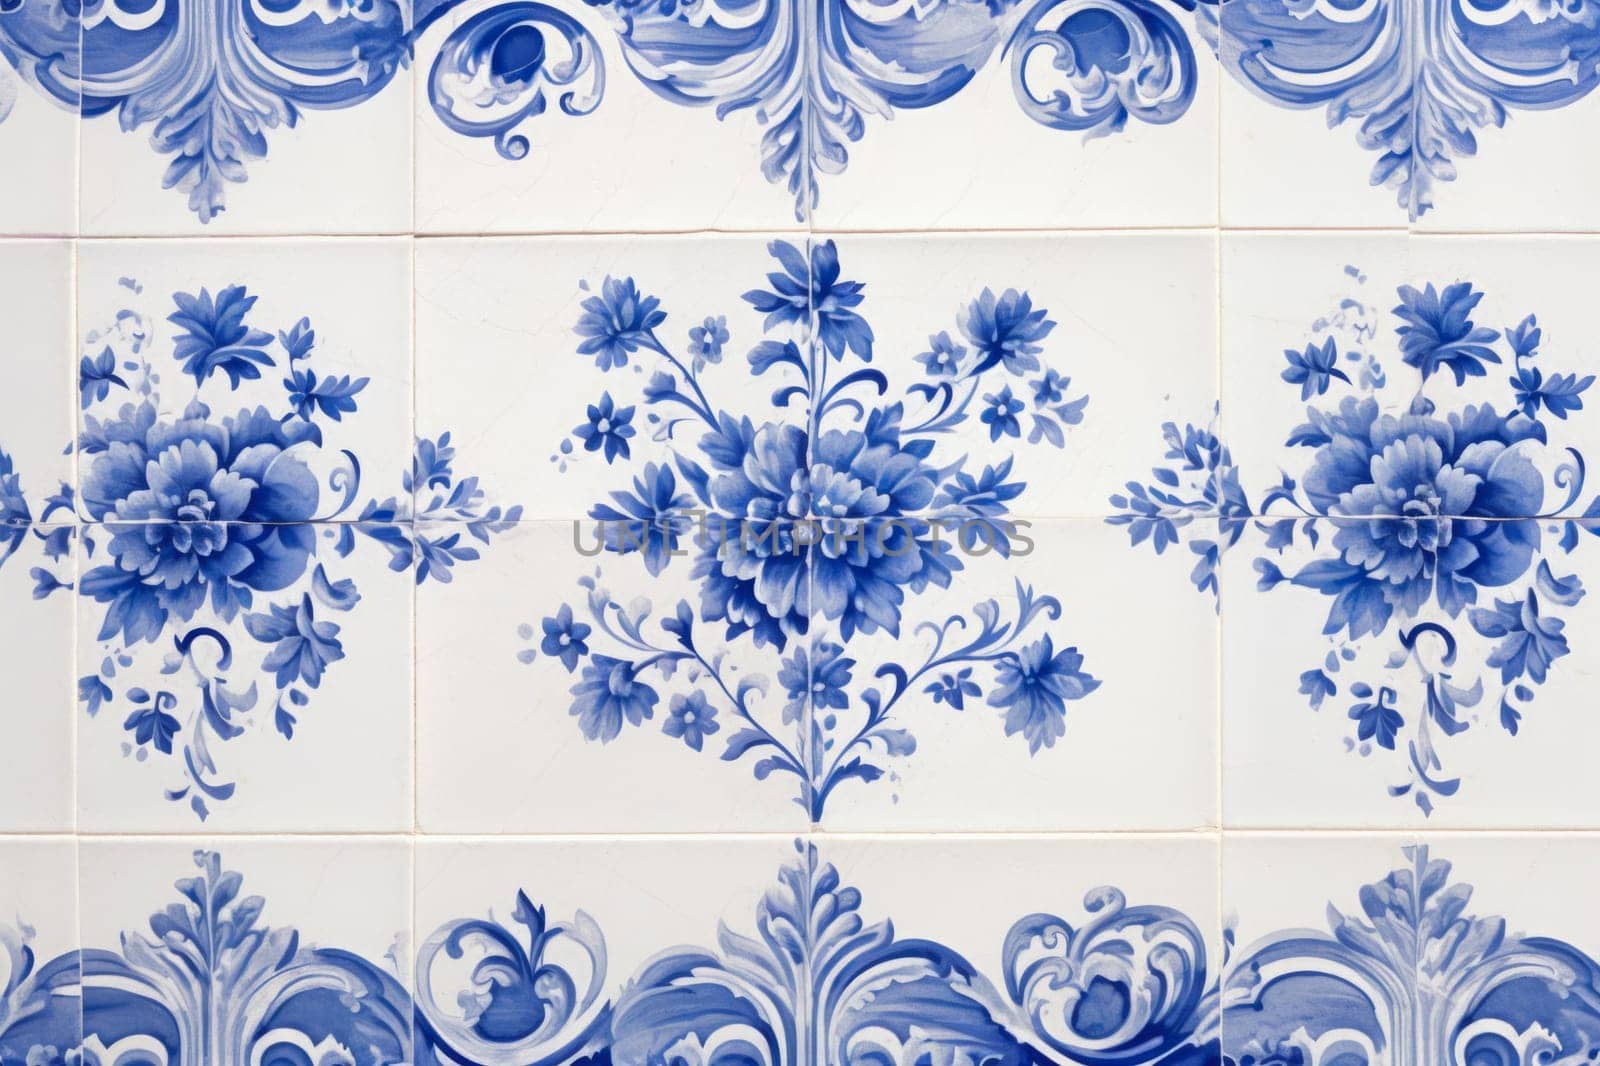 Typical old tiles of Portugal, detail of a classic ceramic tiles azulejos, art of Portugal